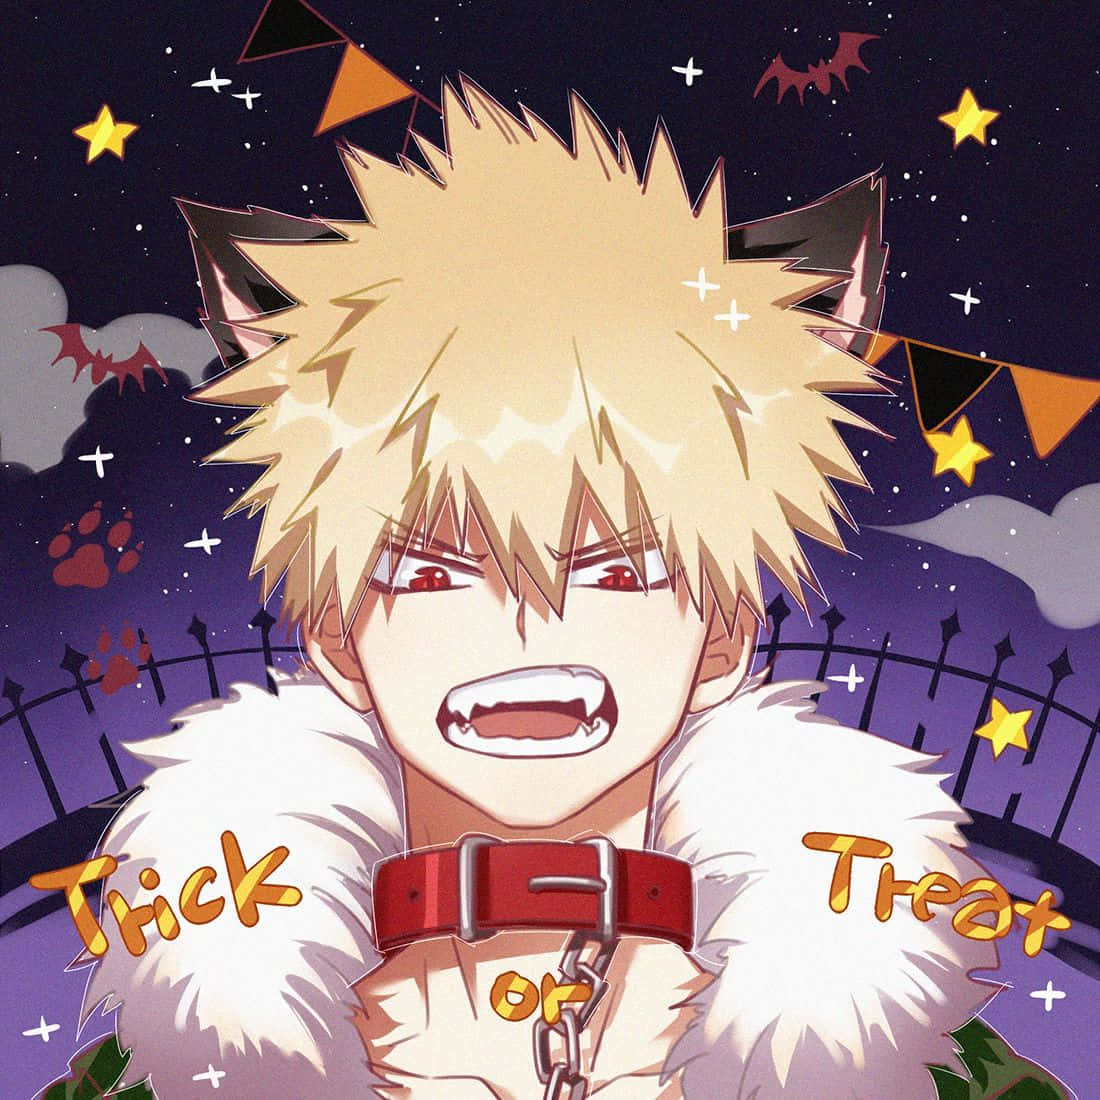 A close-up of the vibrant and distinct features of Bakugou's face Wallpaper